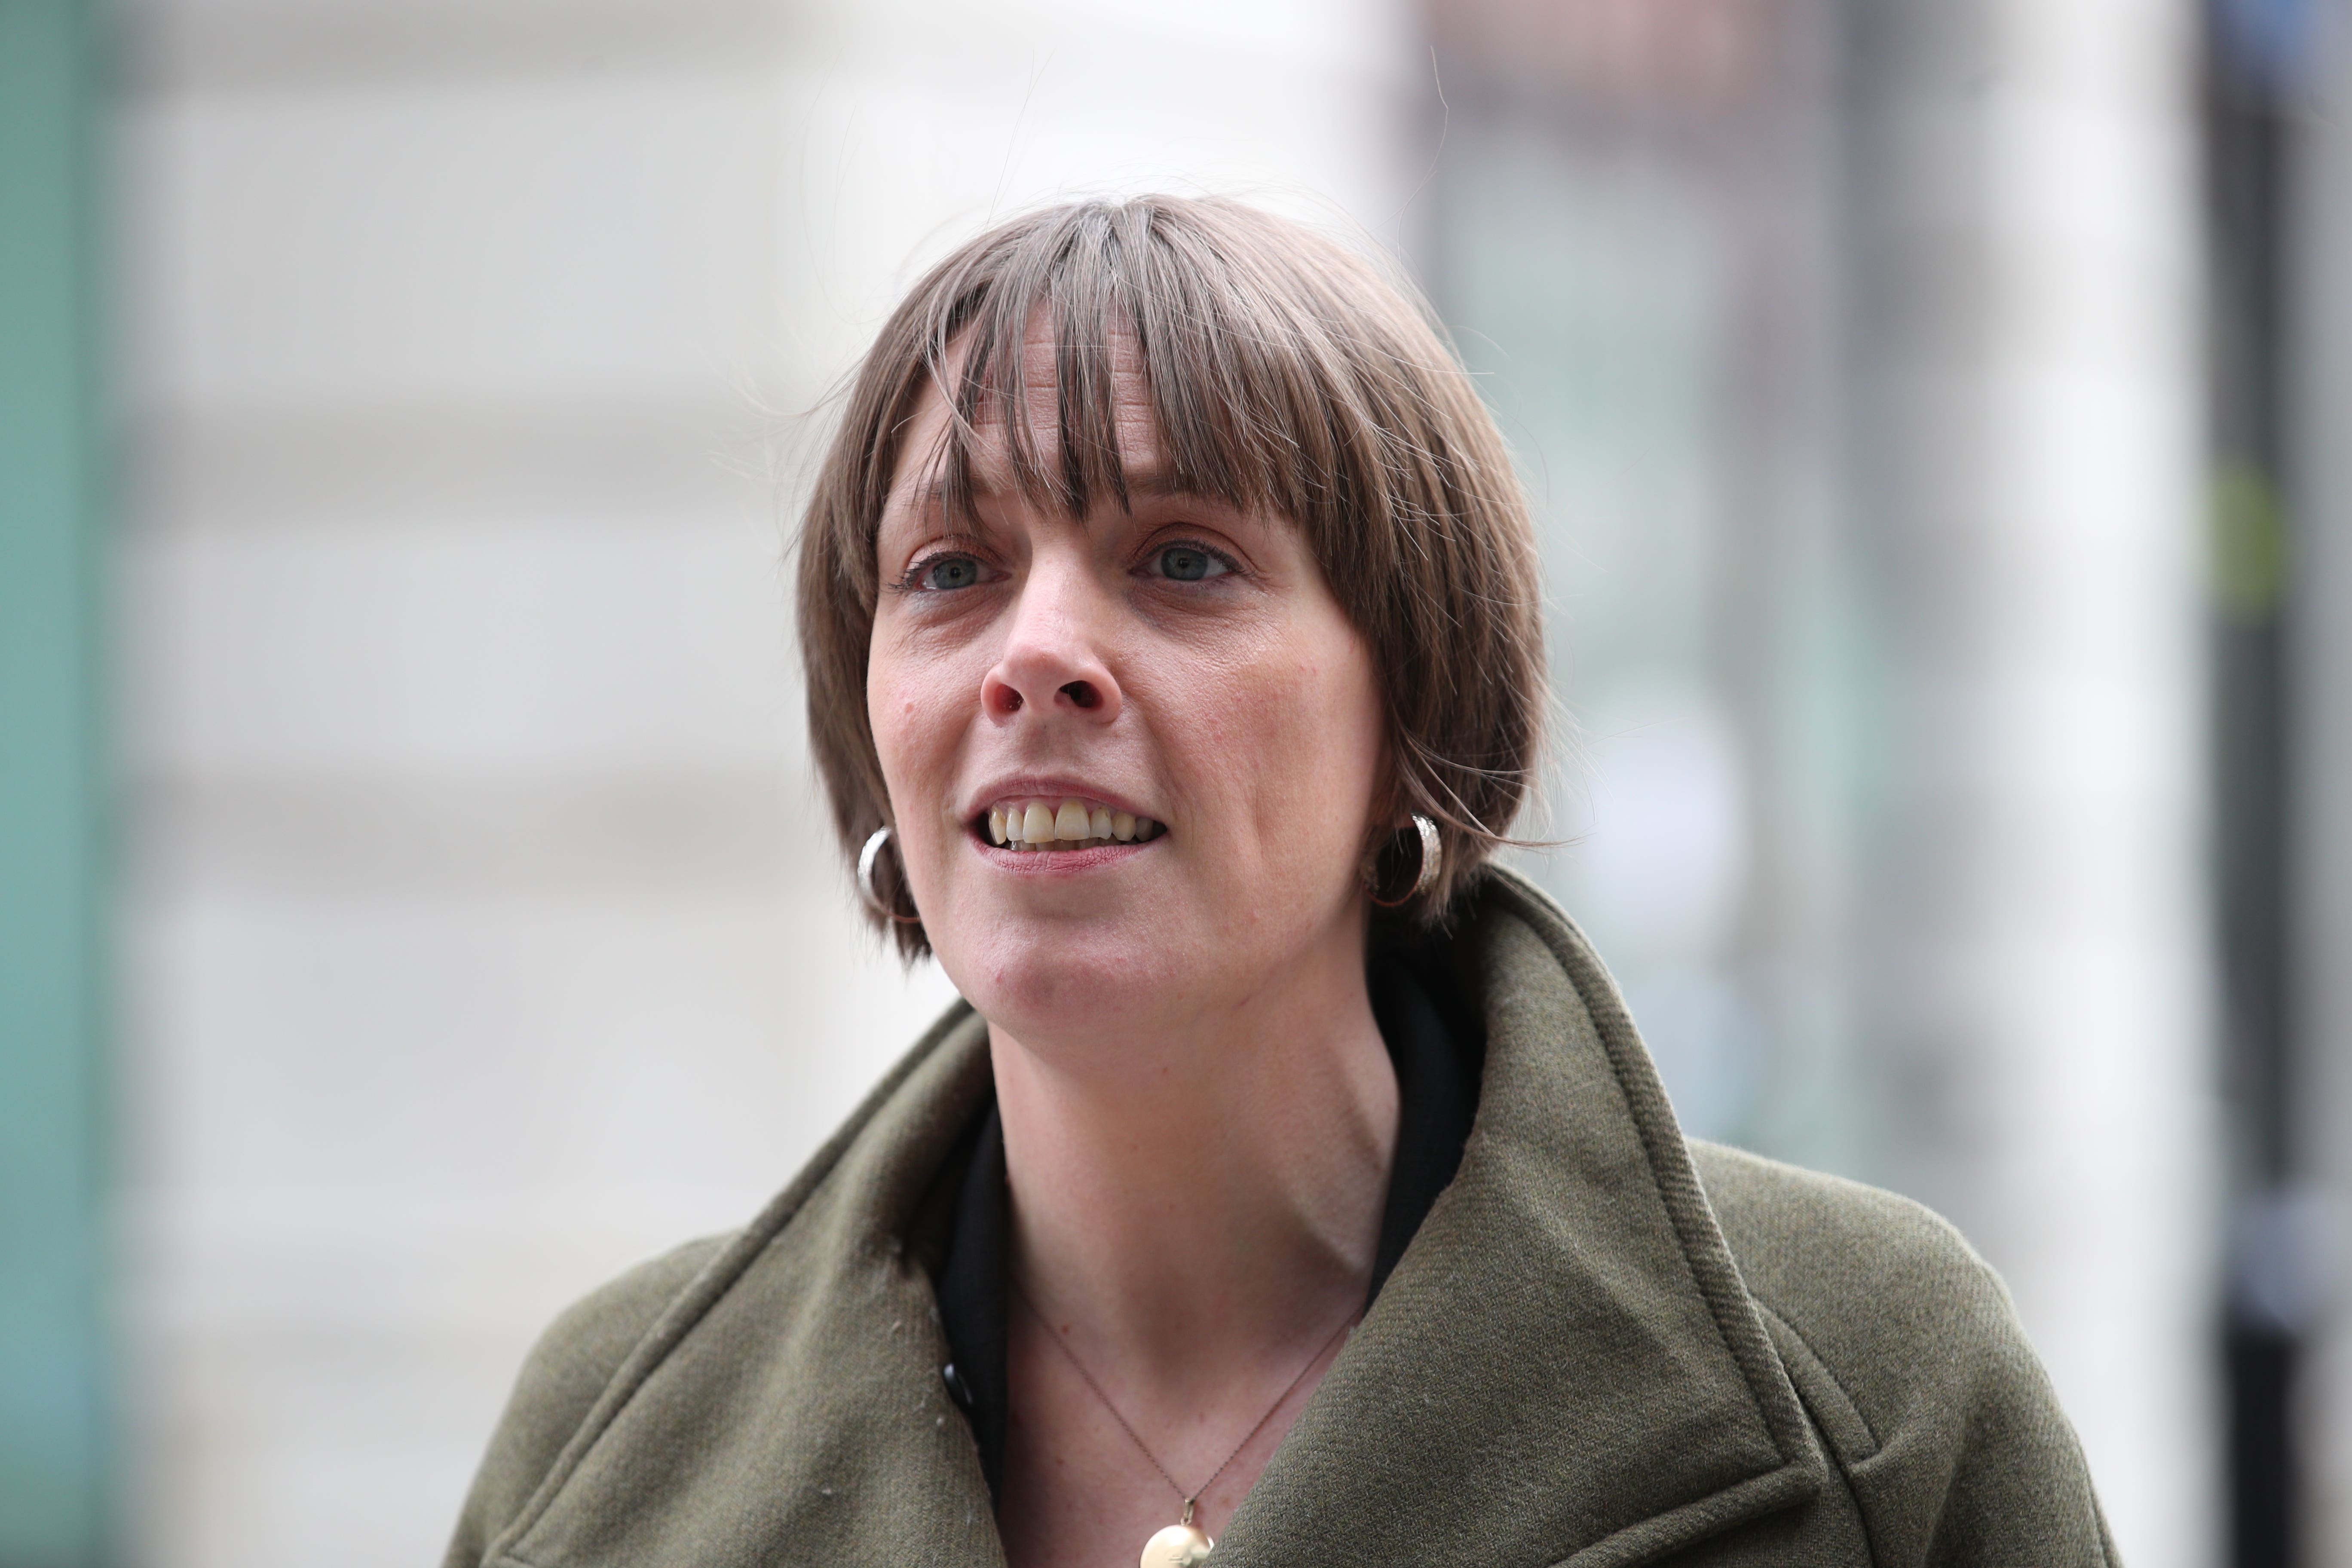 Jess Phillips said there should be an investigation into the claims about Ms Elphicke